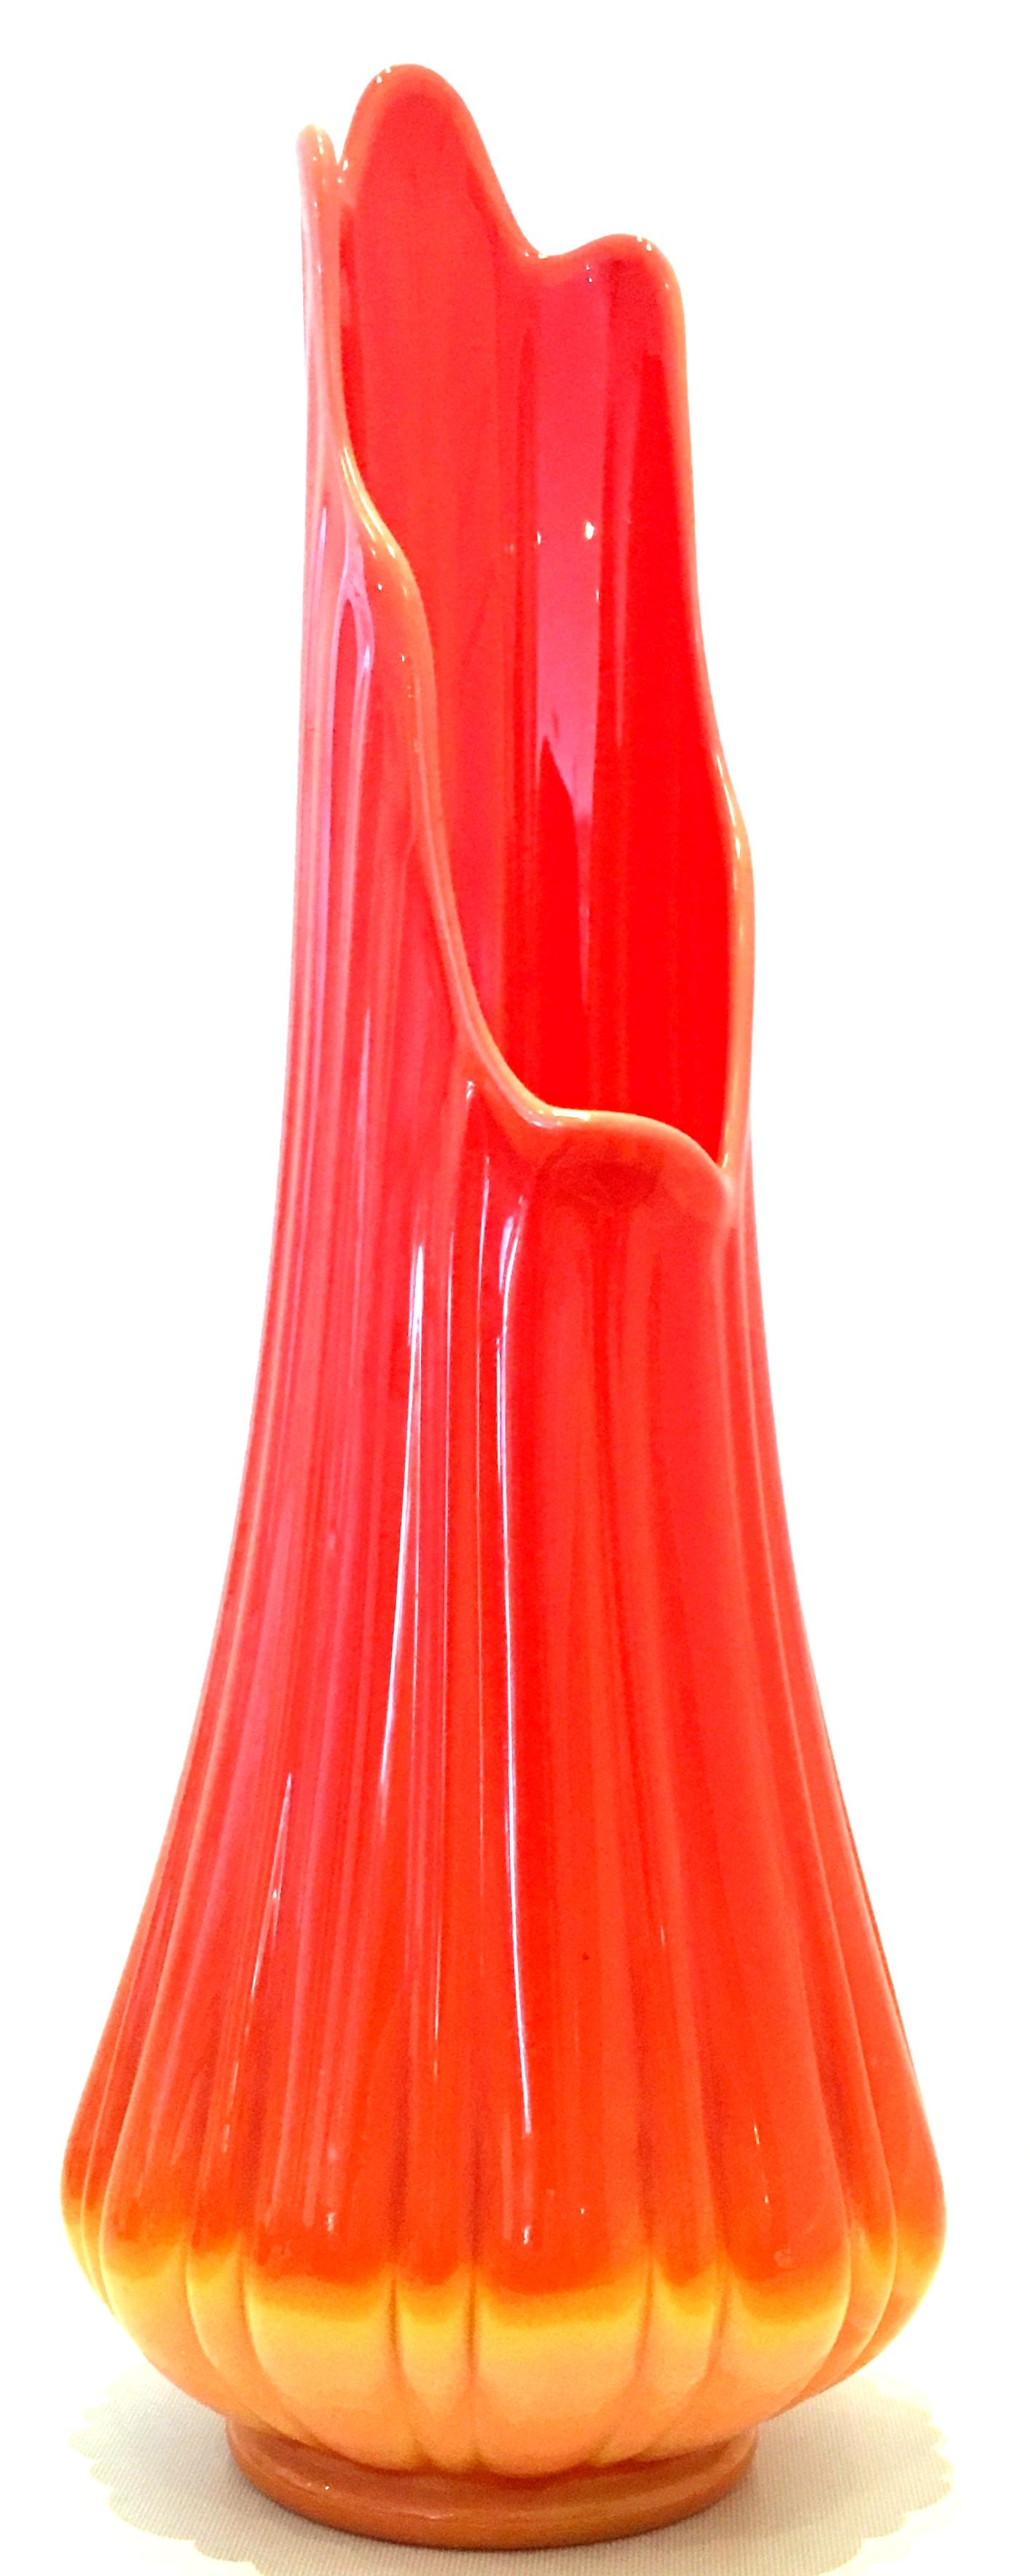 Mid-Century Modern blown glass ribbed slag glass vase. This coveted vase is vibrant orange and yellow with ribbed detail.